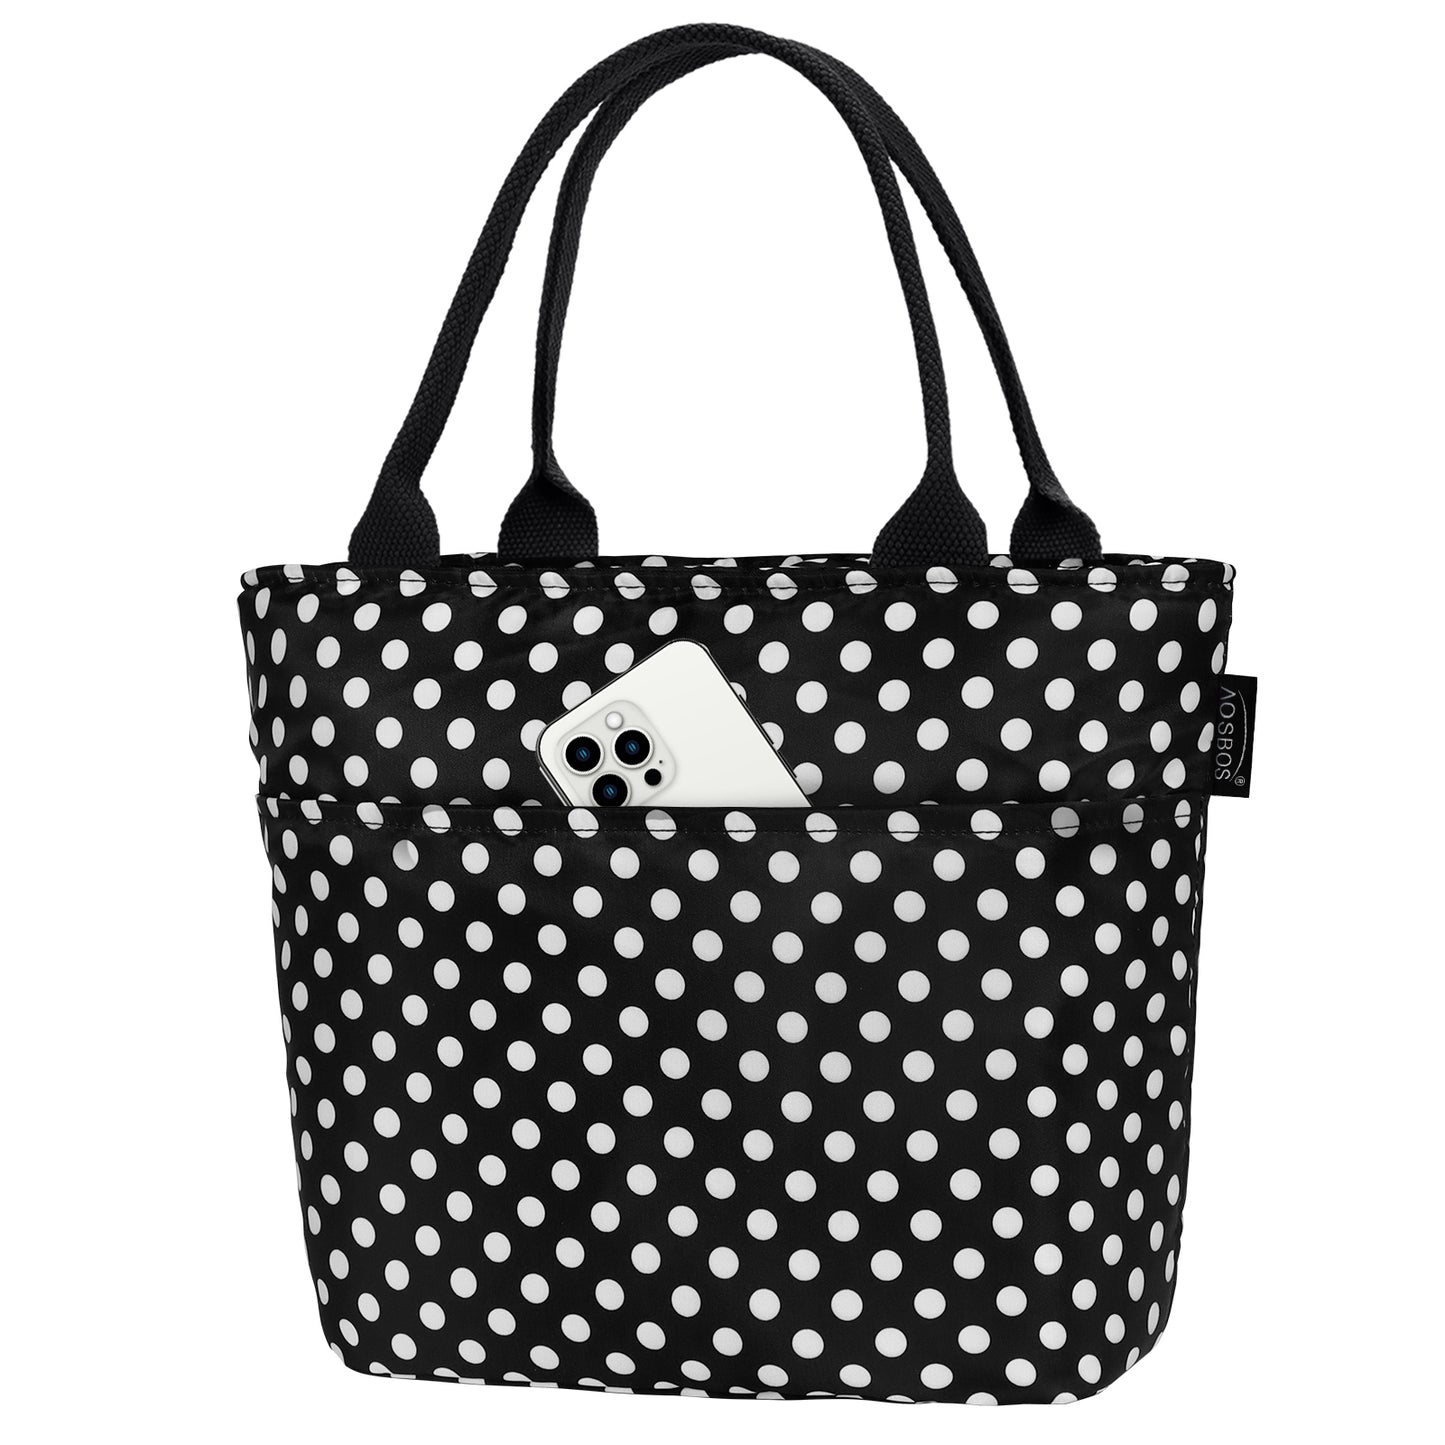 Aosbos Lunch Bag Women Insulated Thermal Lunch Box Cooler Tote Bag